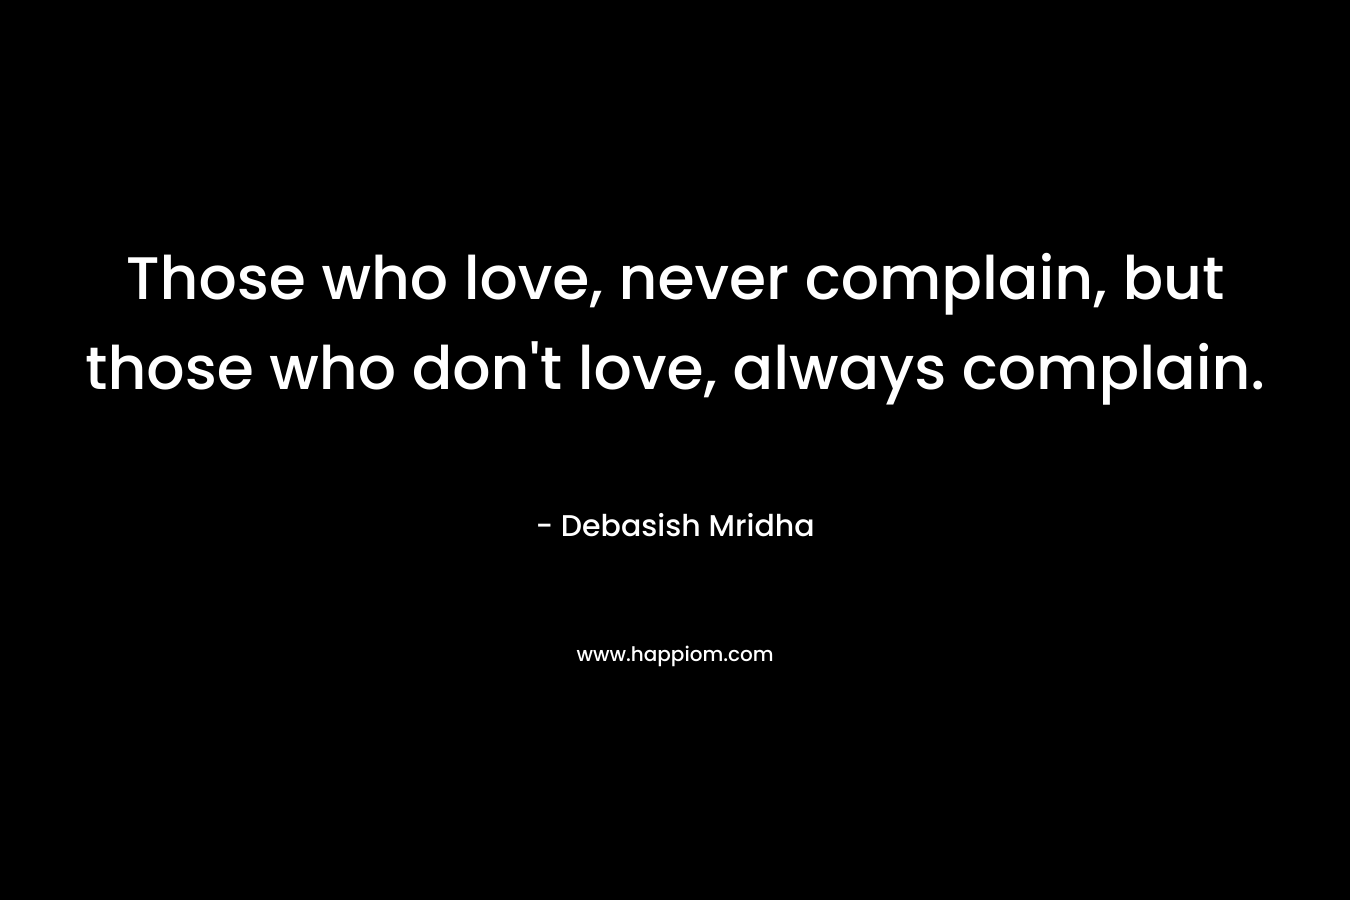 Those who love, never complain, but those who don't love, always complain.